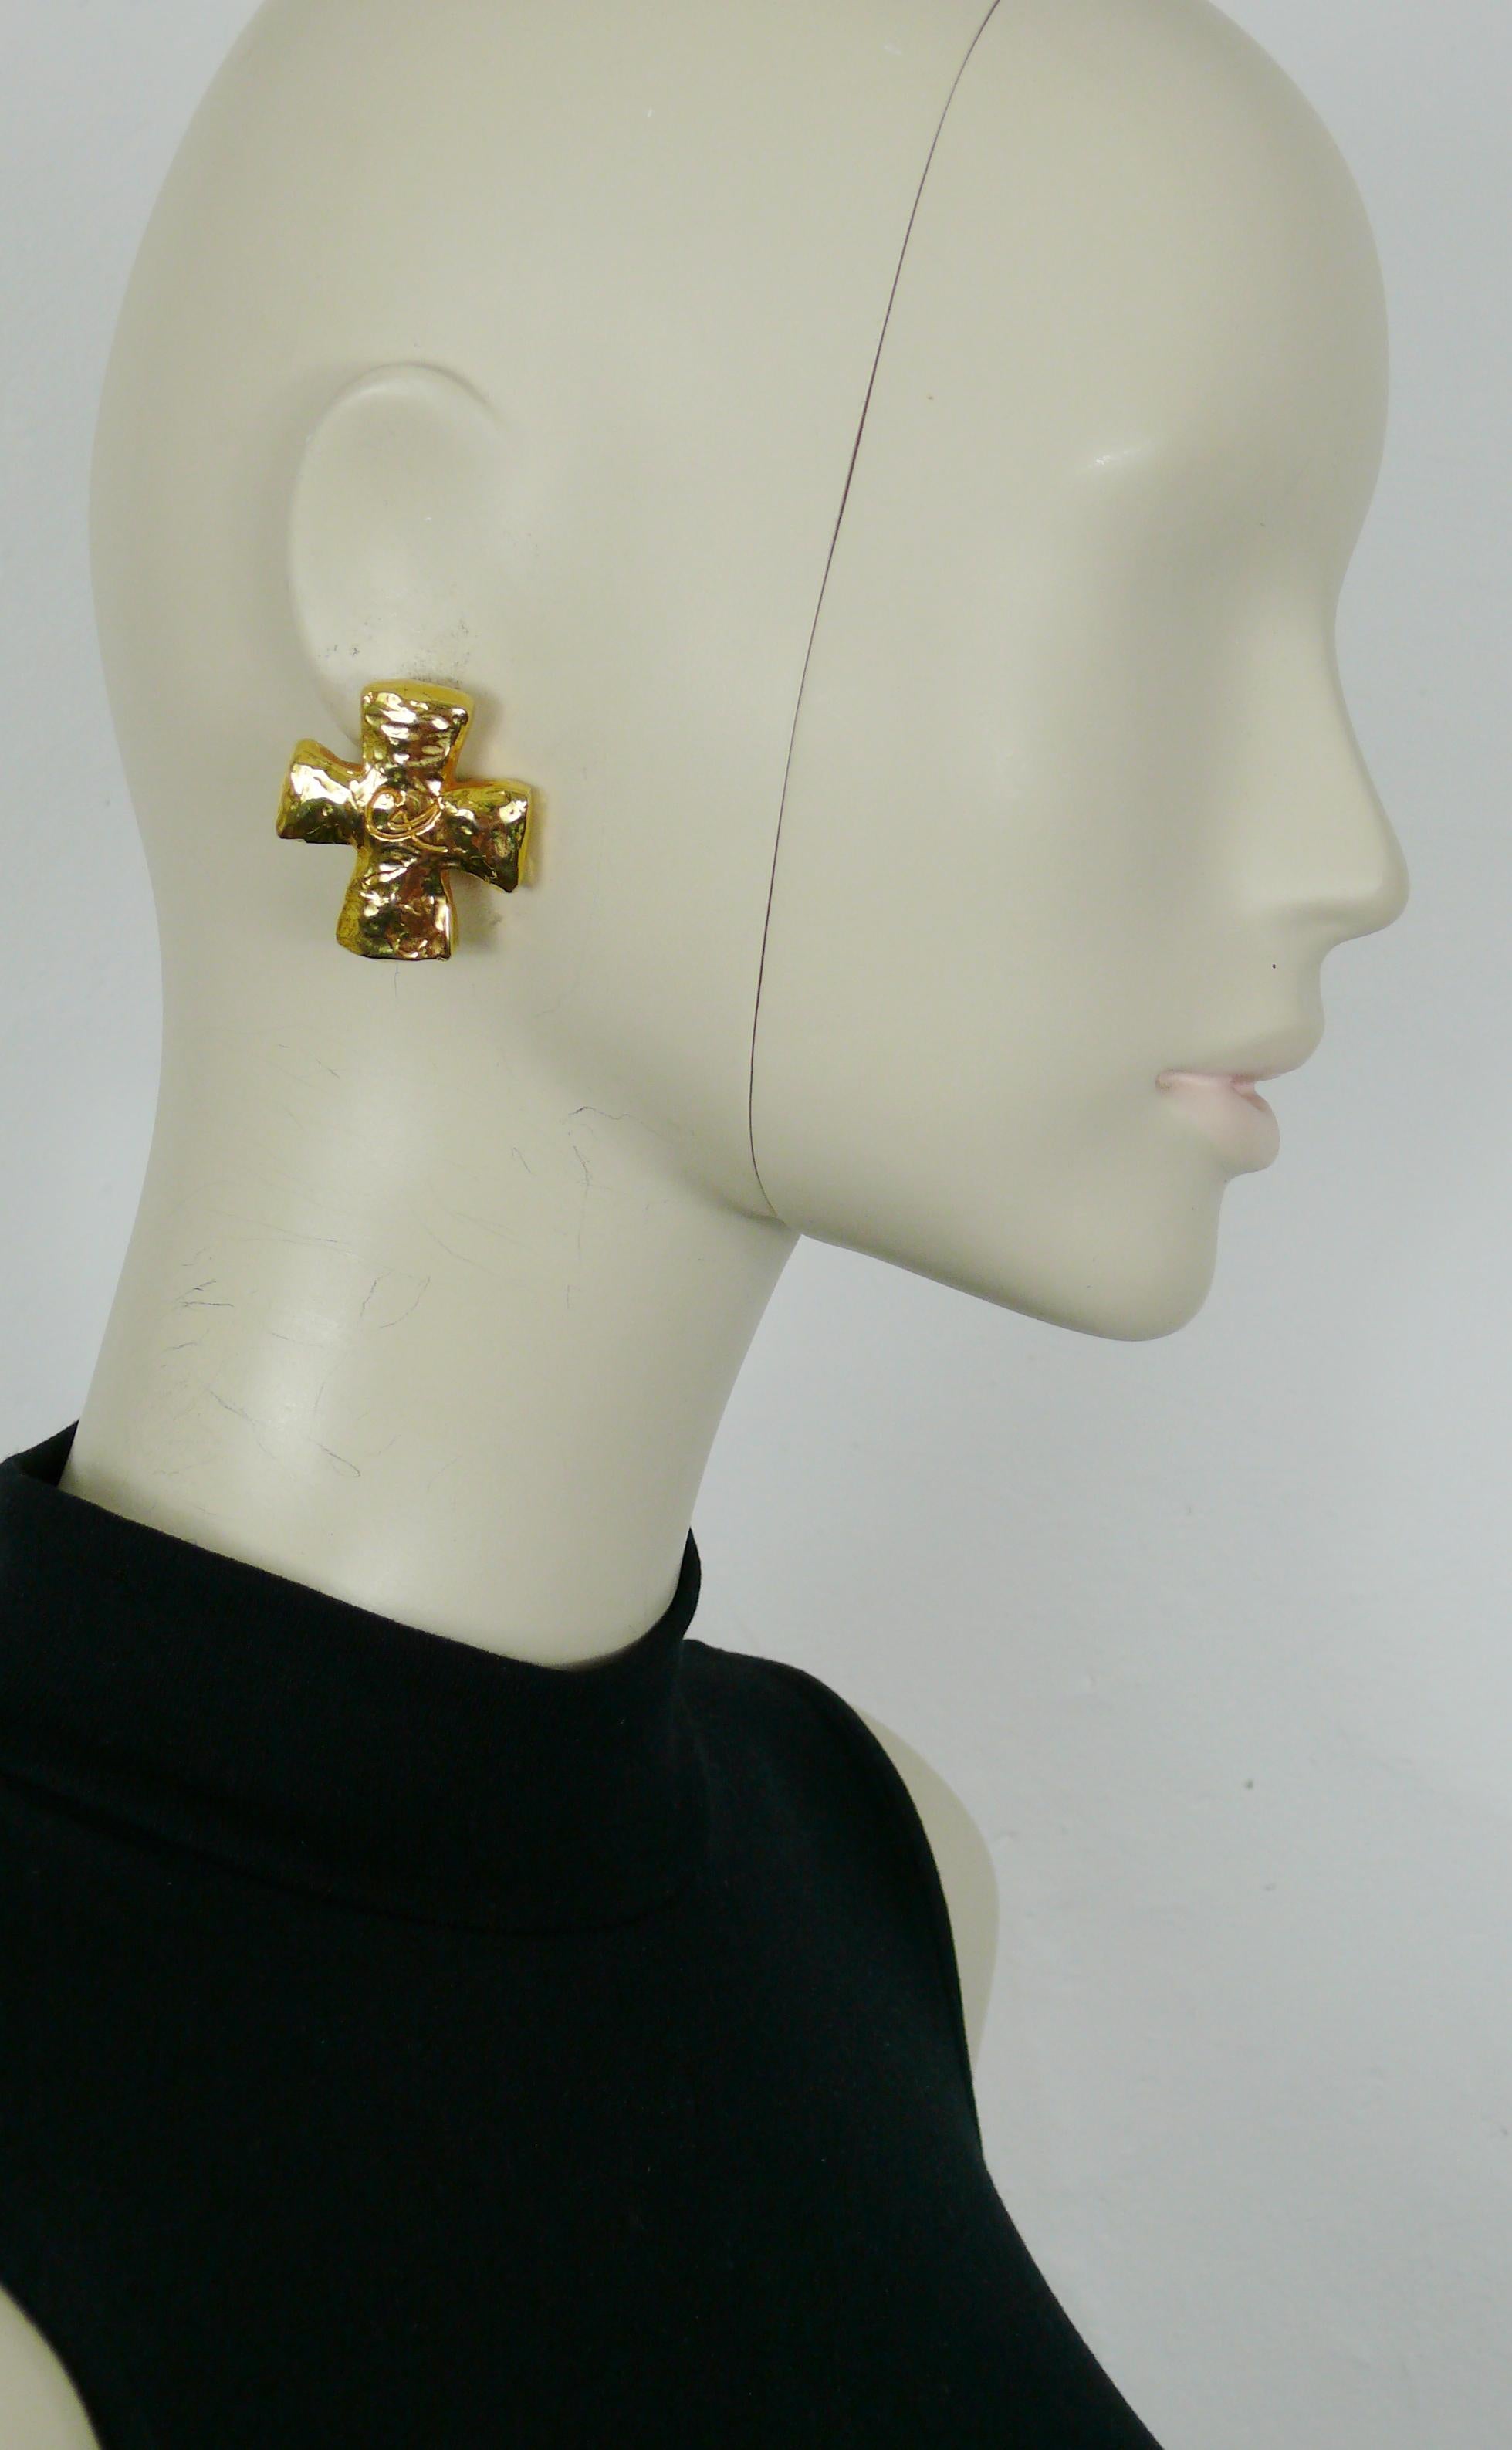 CHRISTIAN LACROIX vintage textured cross clip-on earrings embossed with CL monogram.

Gold tone resin.

Marked CHRISTIAN LACROIX CL Made in France.

Indicative measurements : height 3.8 cm (1.50 inches) / width 3.3 cm (1.30 inches).

NOTES
- This is